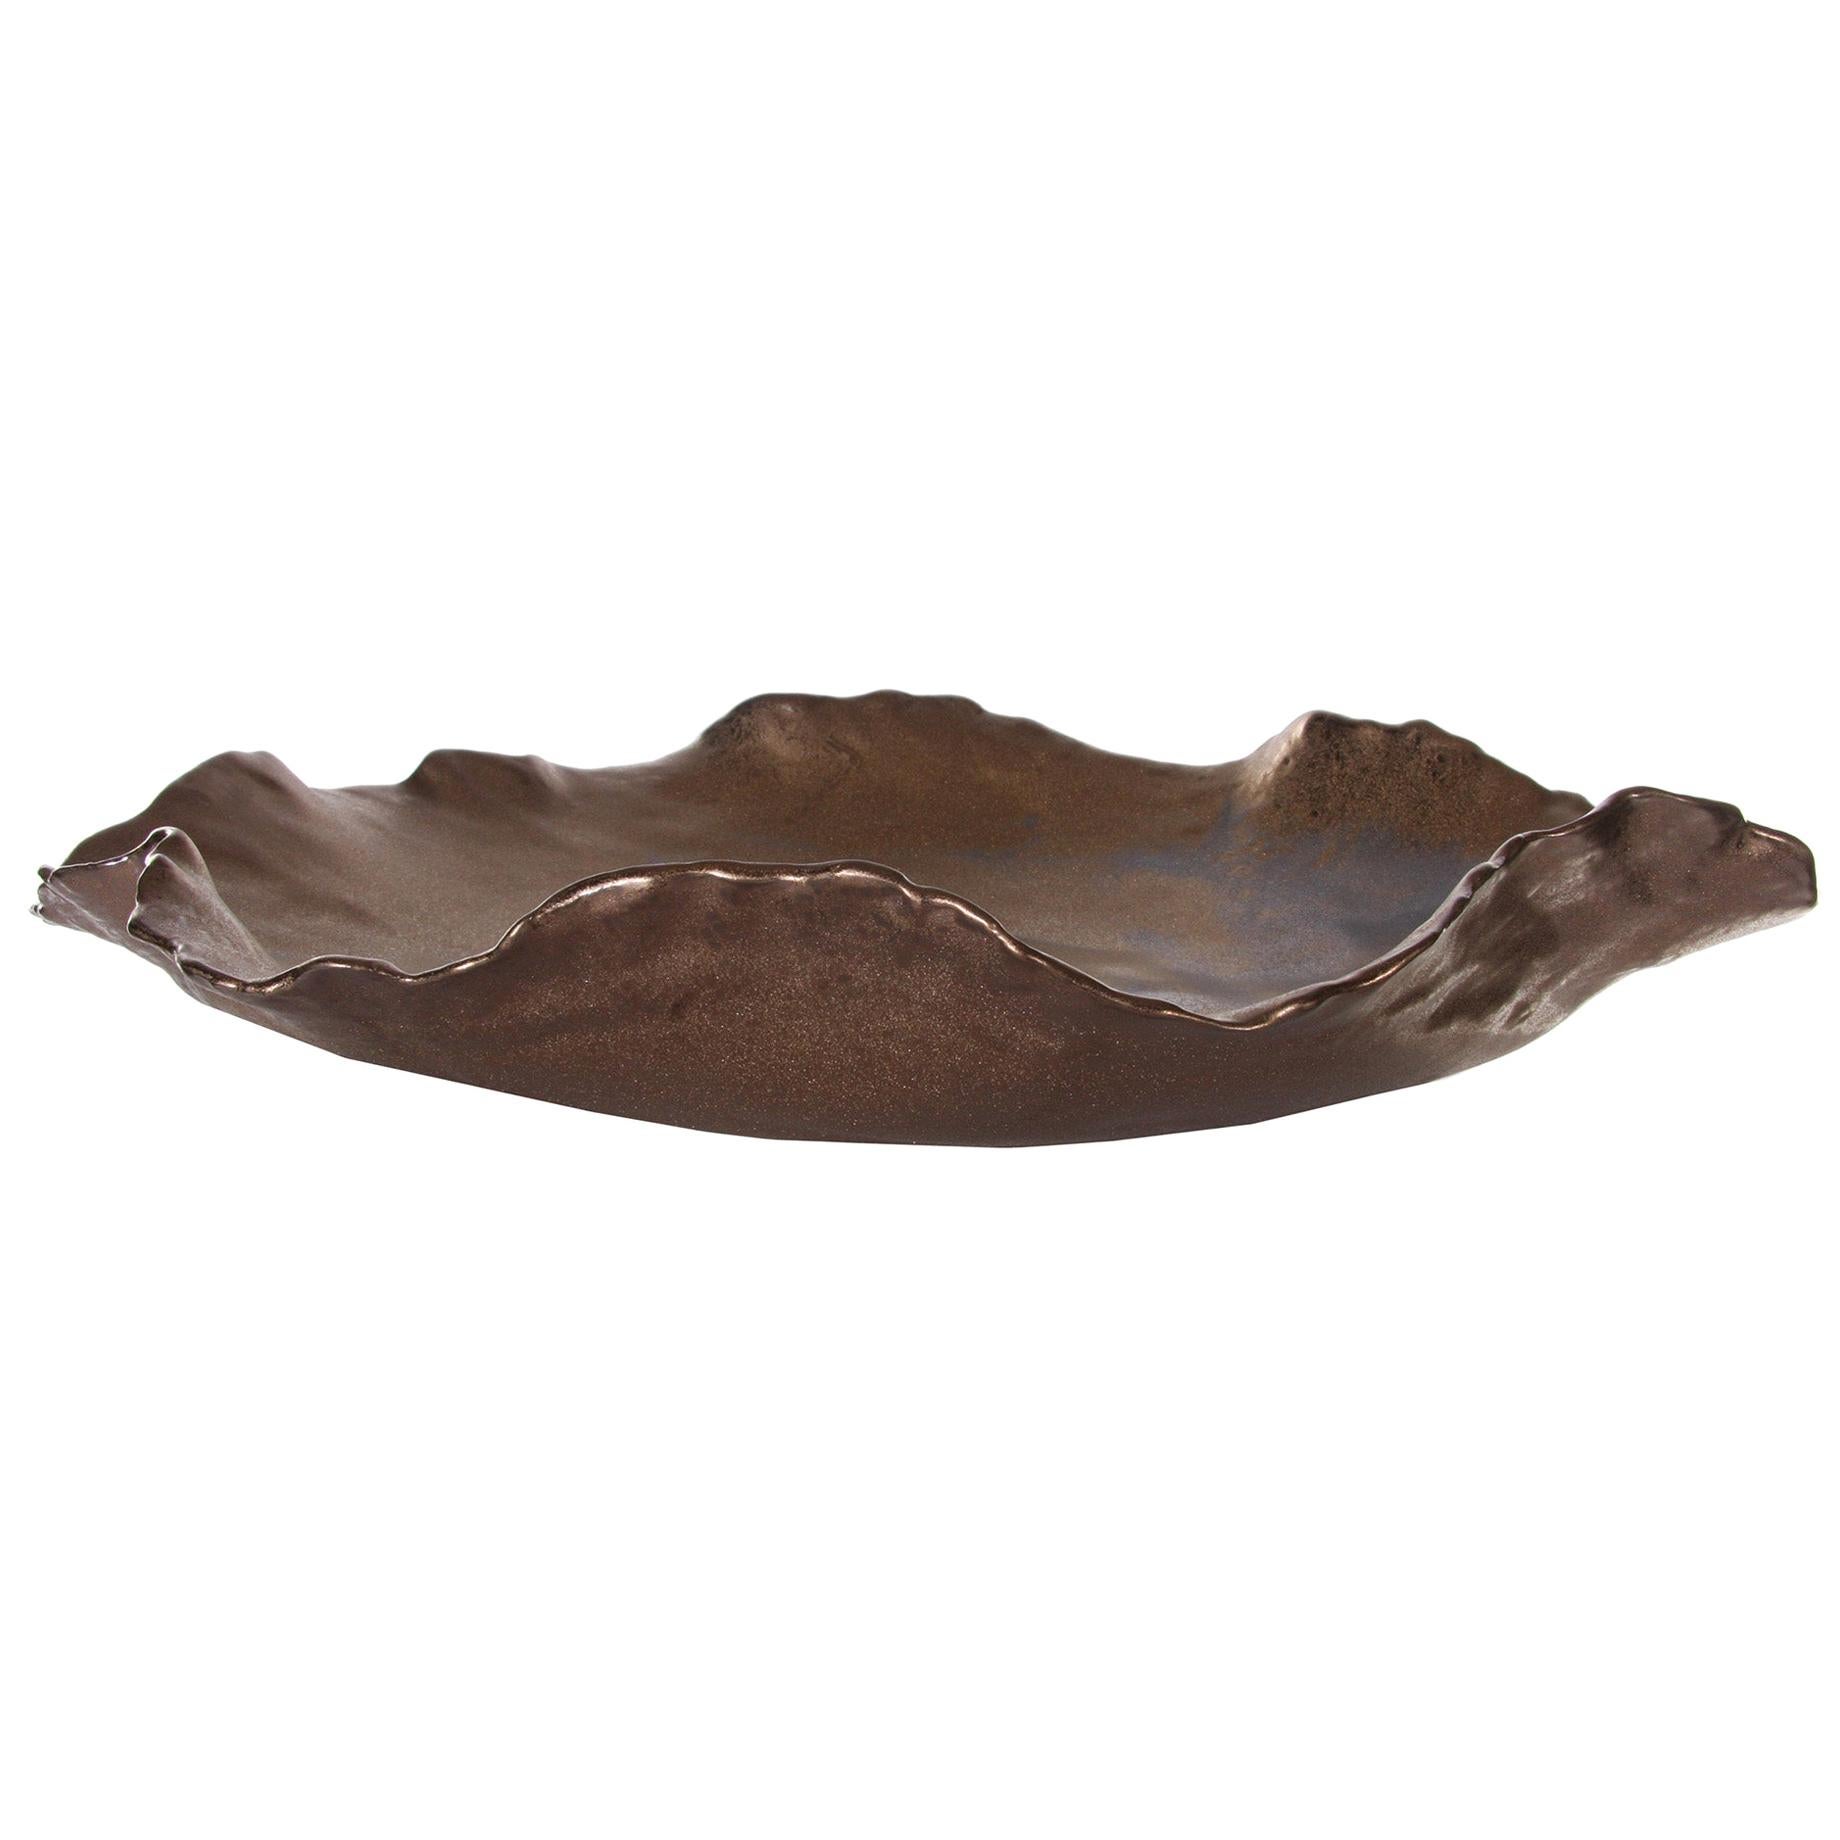 Rowan Ceramic Bowl with Copper Colored Finish by CuratedKravet